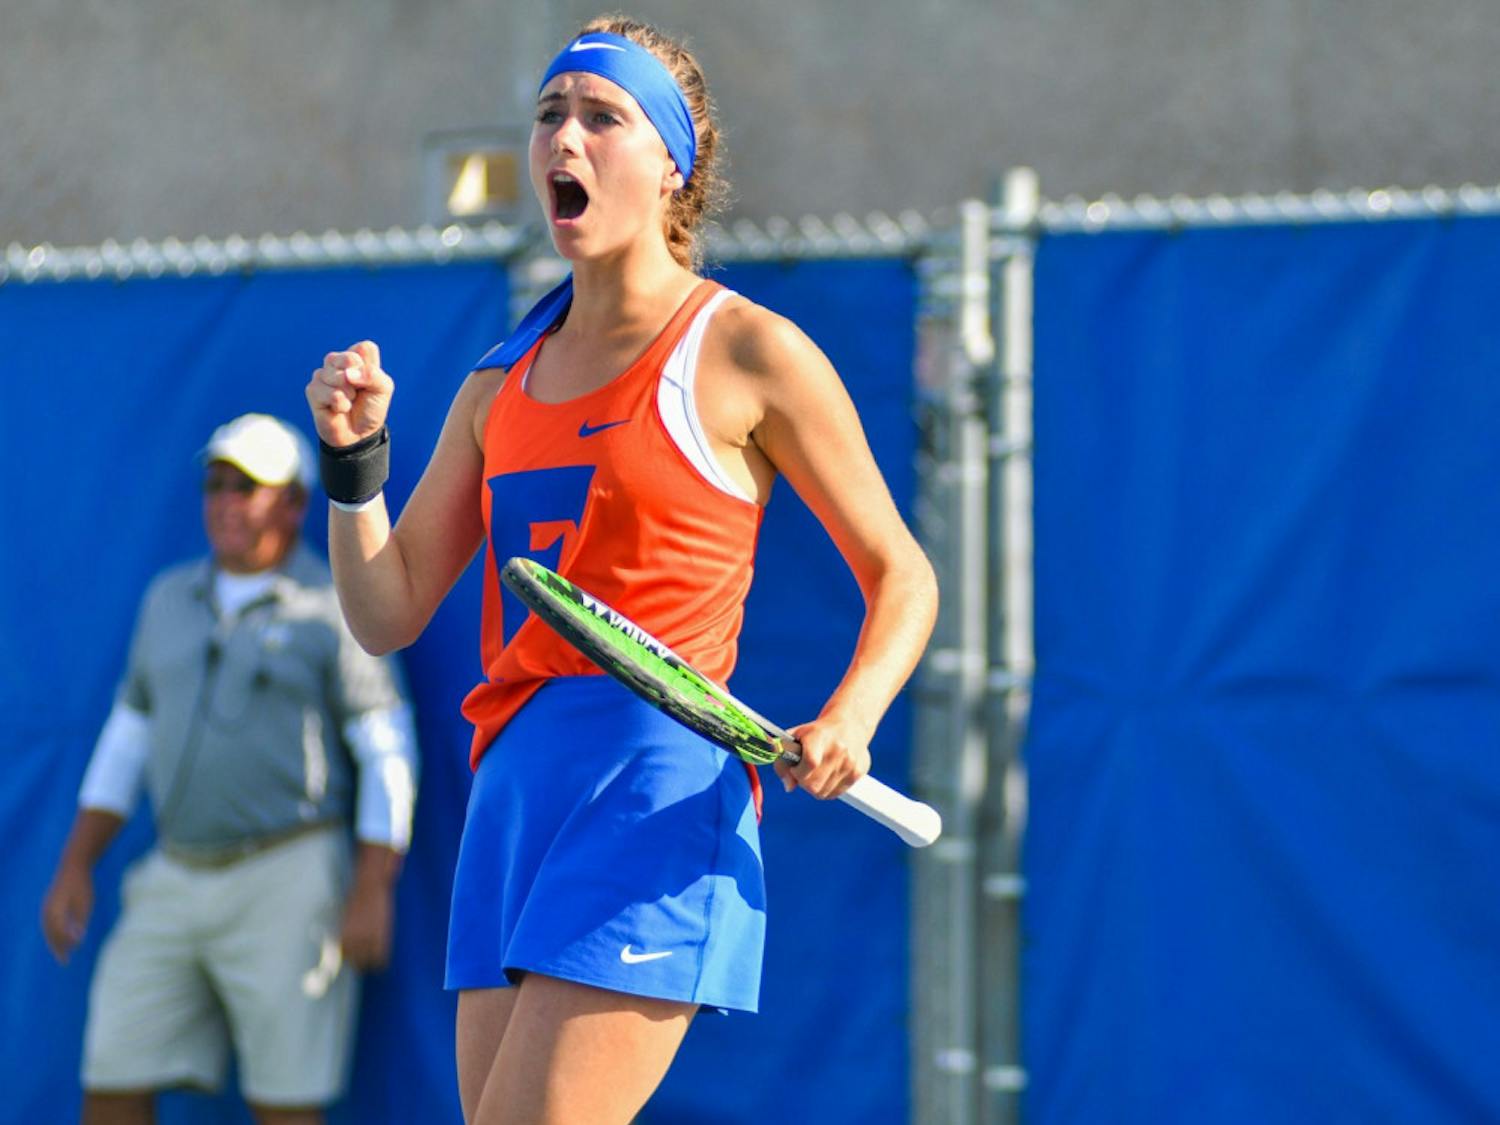 Florida sophomore Ida Jarlskog holds an 11-3 record on Court 1 this season. She will likely face Michigan’s Kate Fahey on Thursday.
&nbsp;